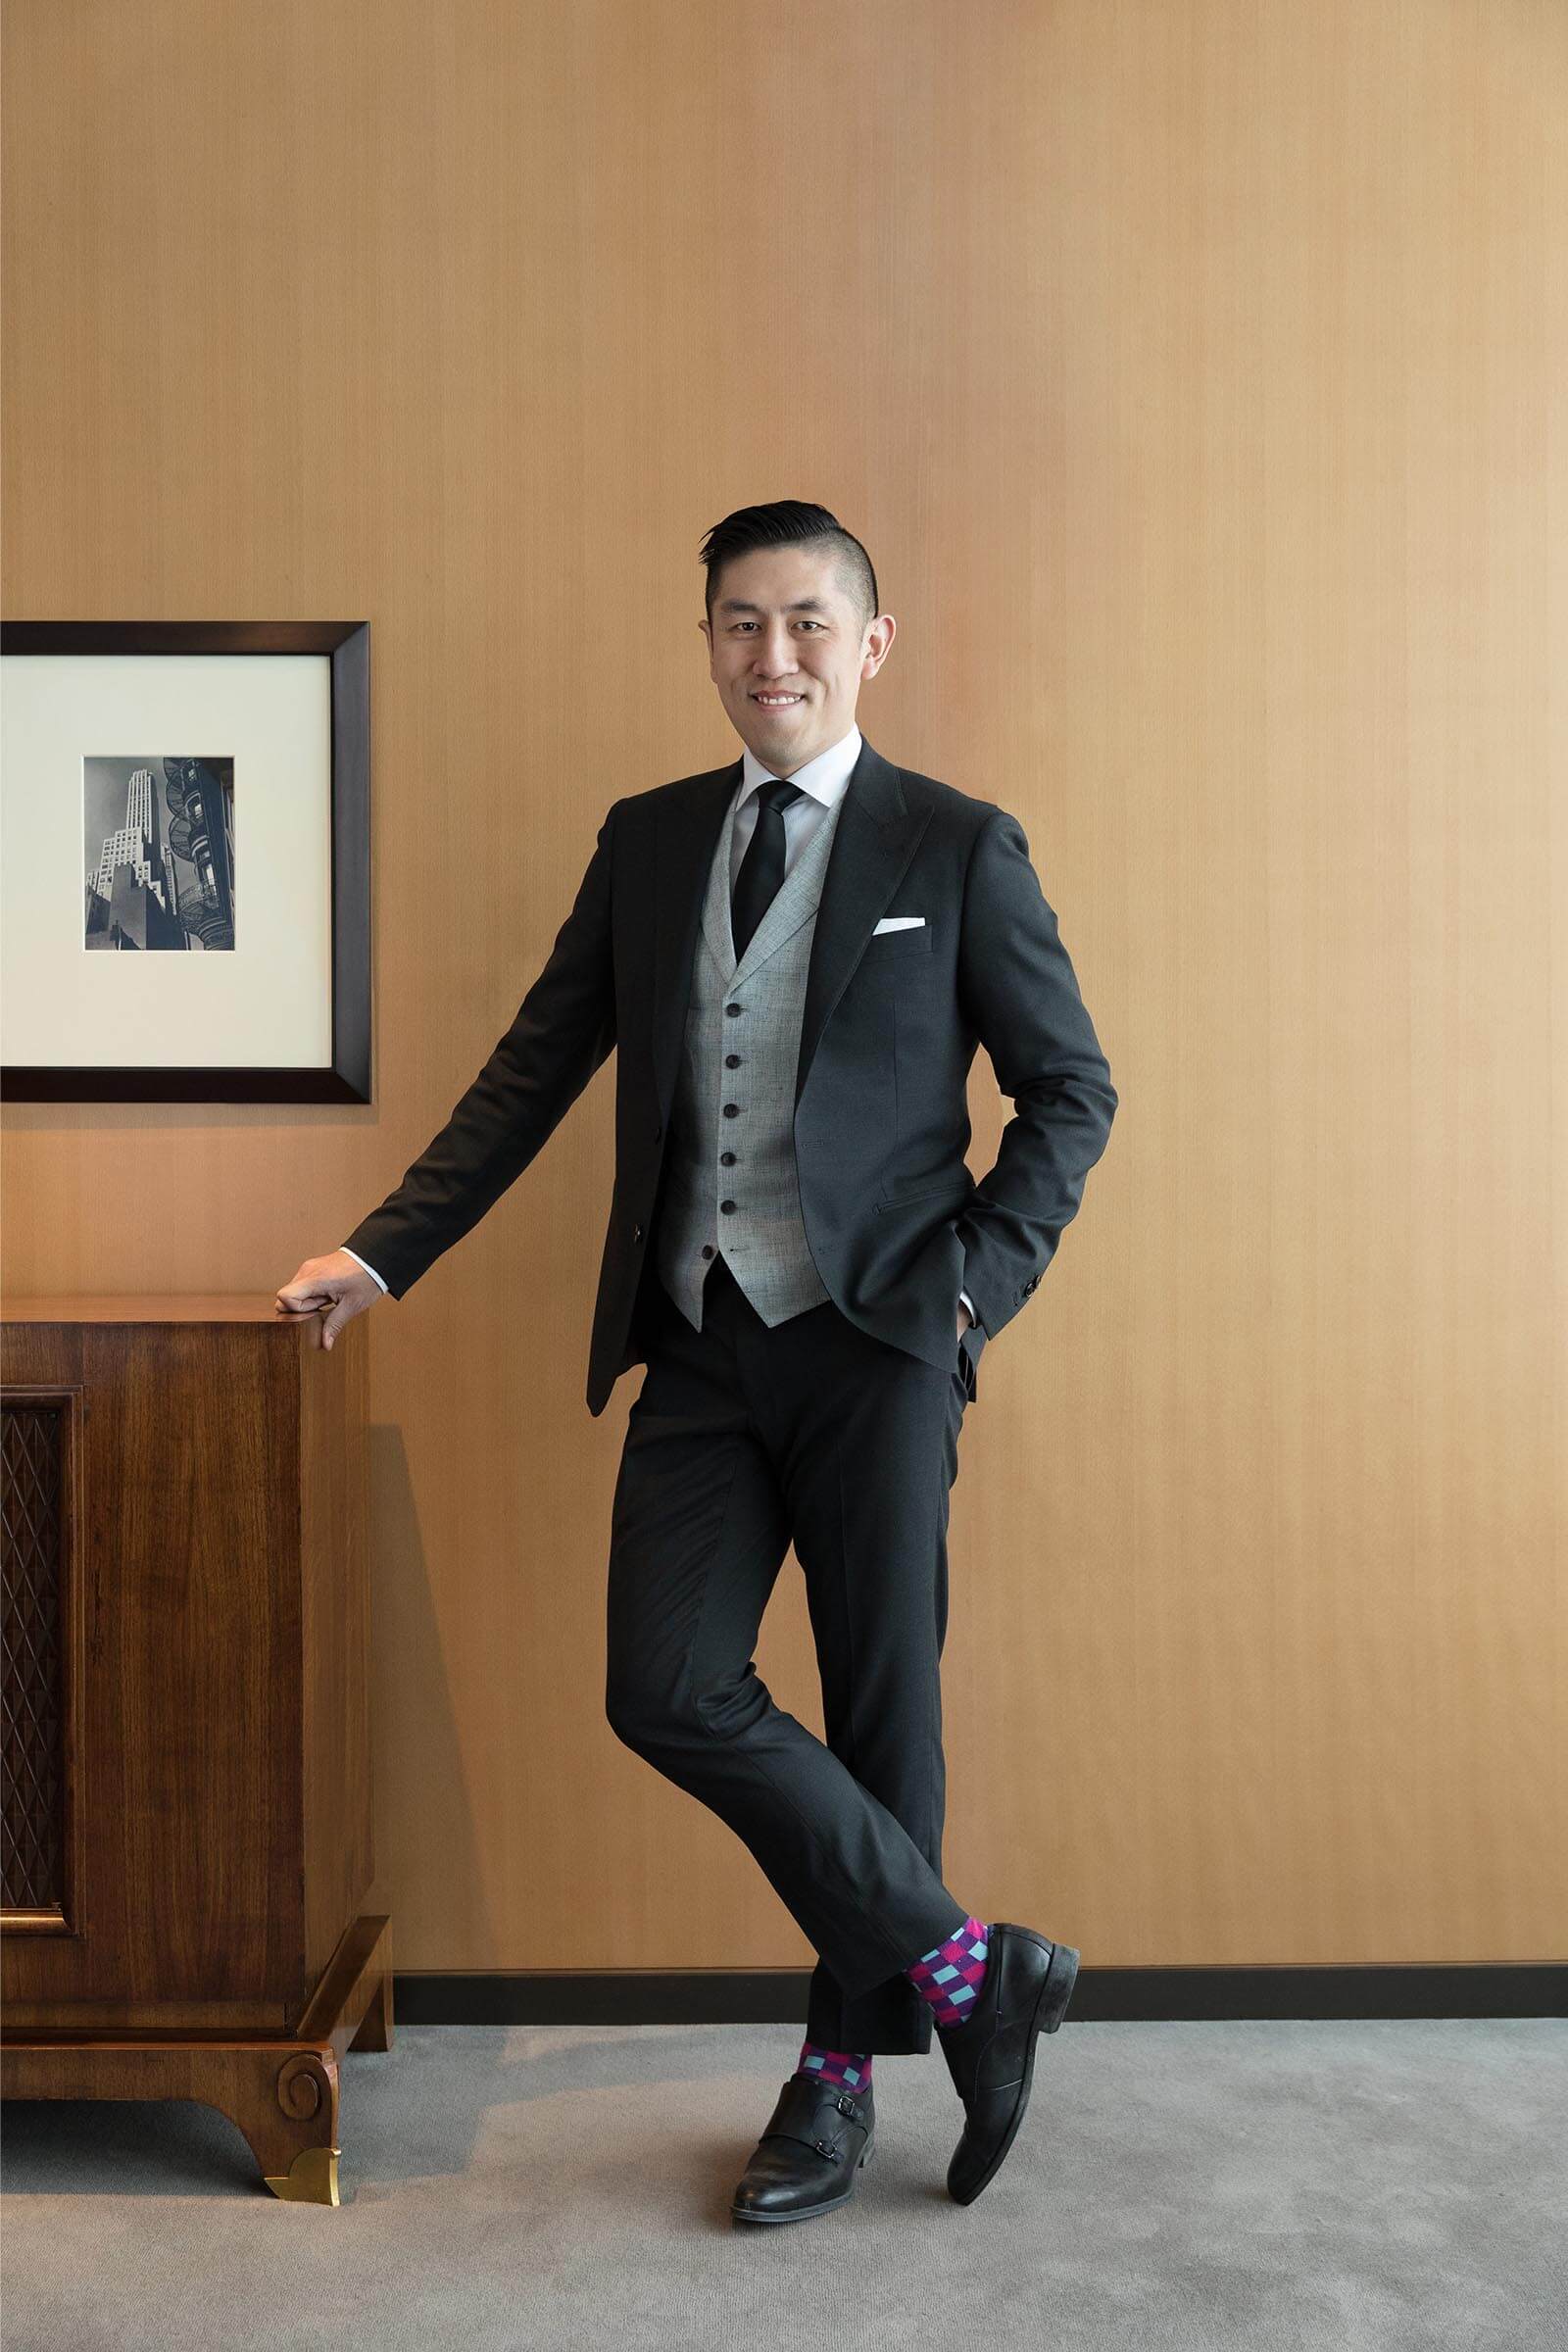 Mark Chan - Vice-President,
Wealth Planning